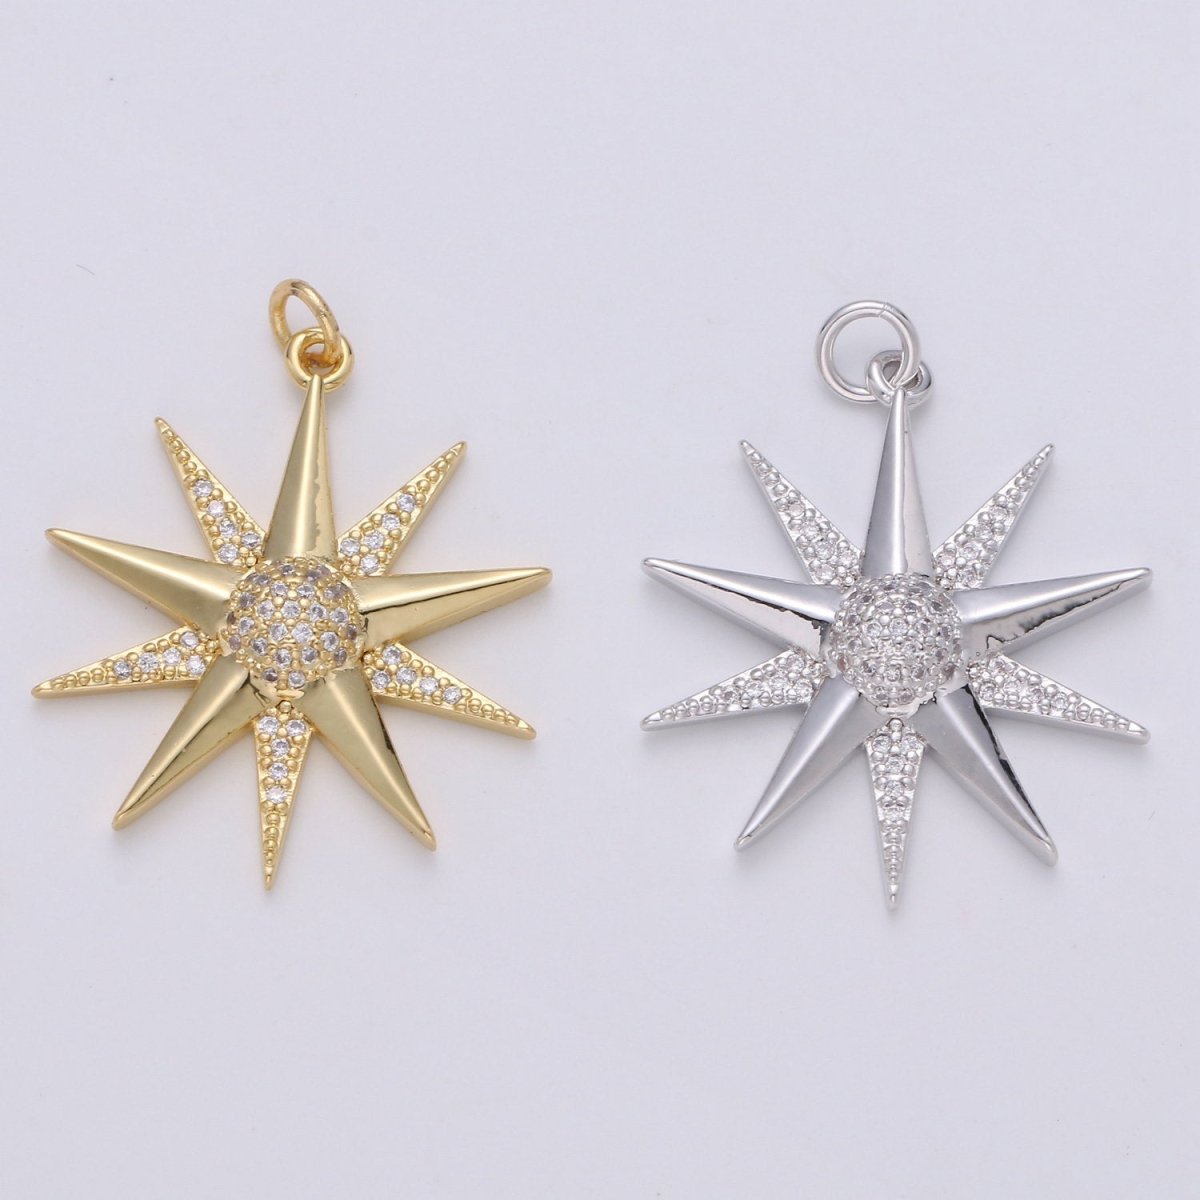 Micro Pave Star Charms, Cubic Zirconia Charms, CZ Charms, Gold Star Charm, Necklace Pendant Bracelet Charms Silver Star Celestial Jewelry D-475 D-587 - DLUXCA